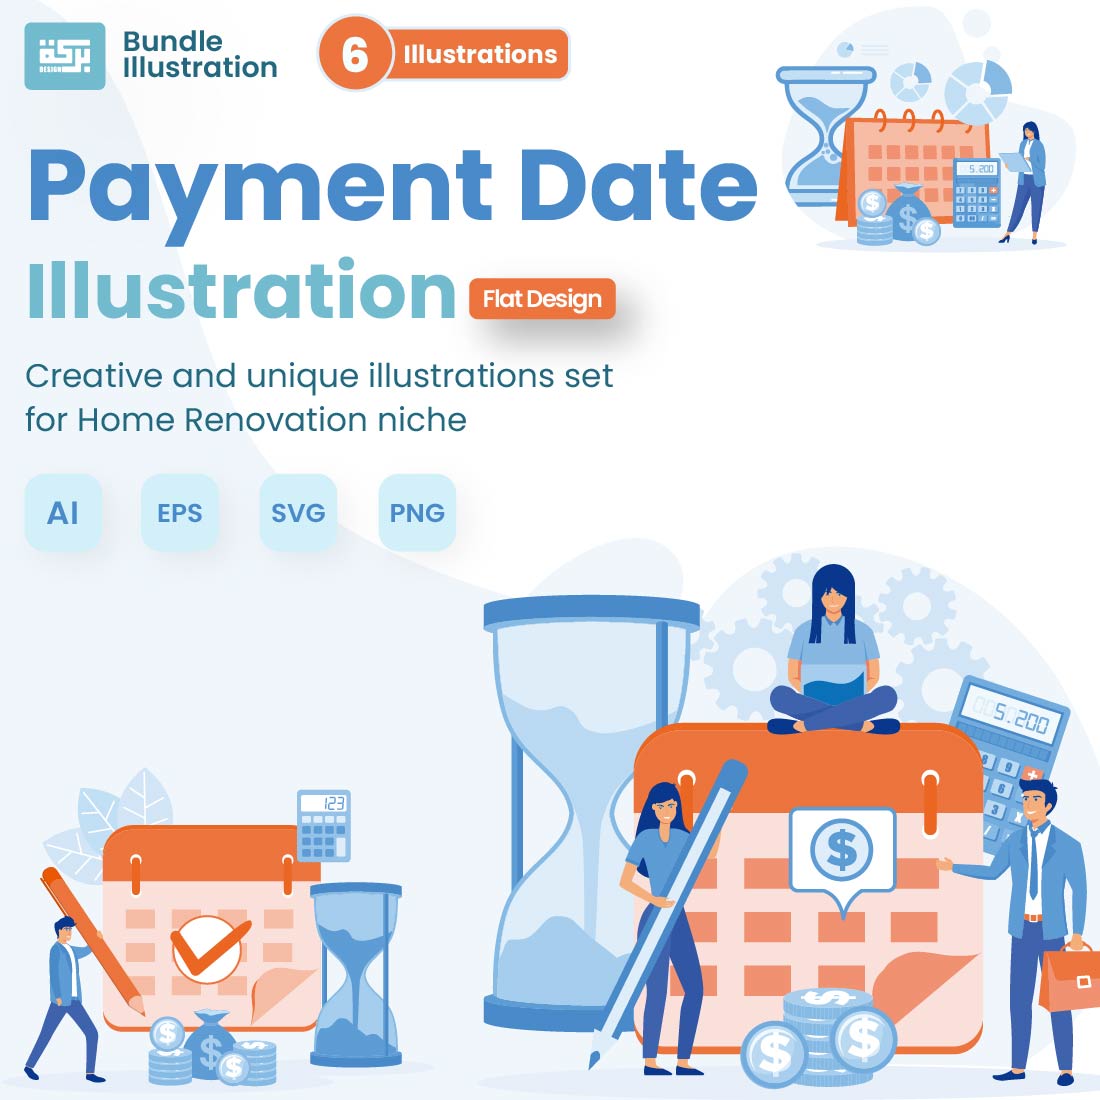 Pay Date Strategy Illustration Design cover image.